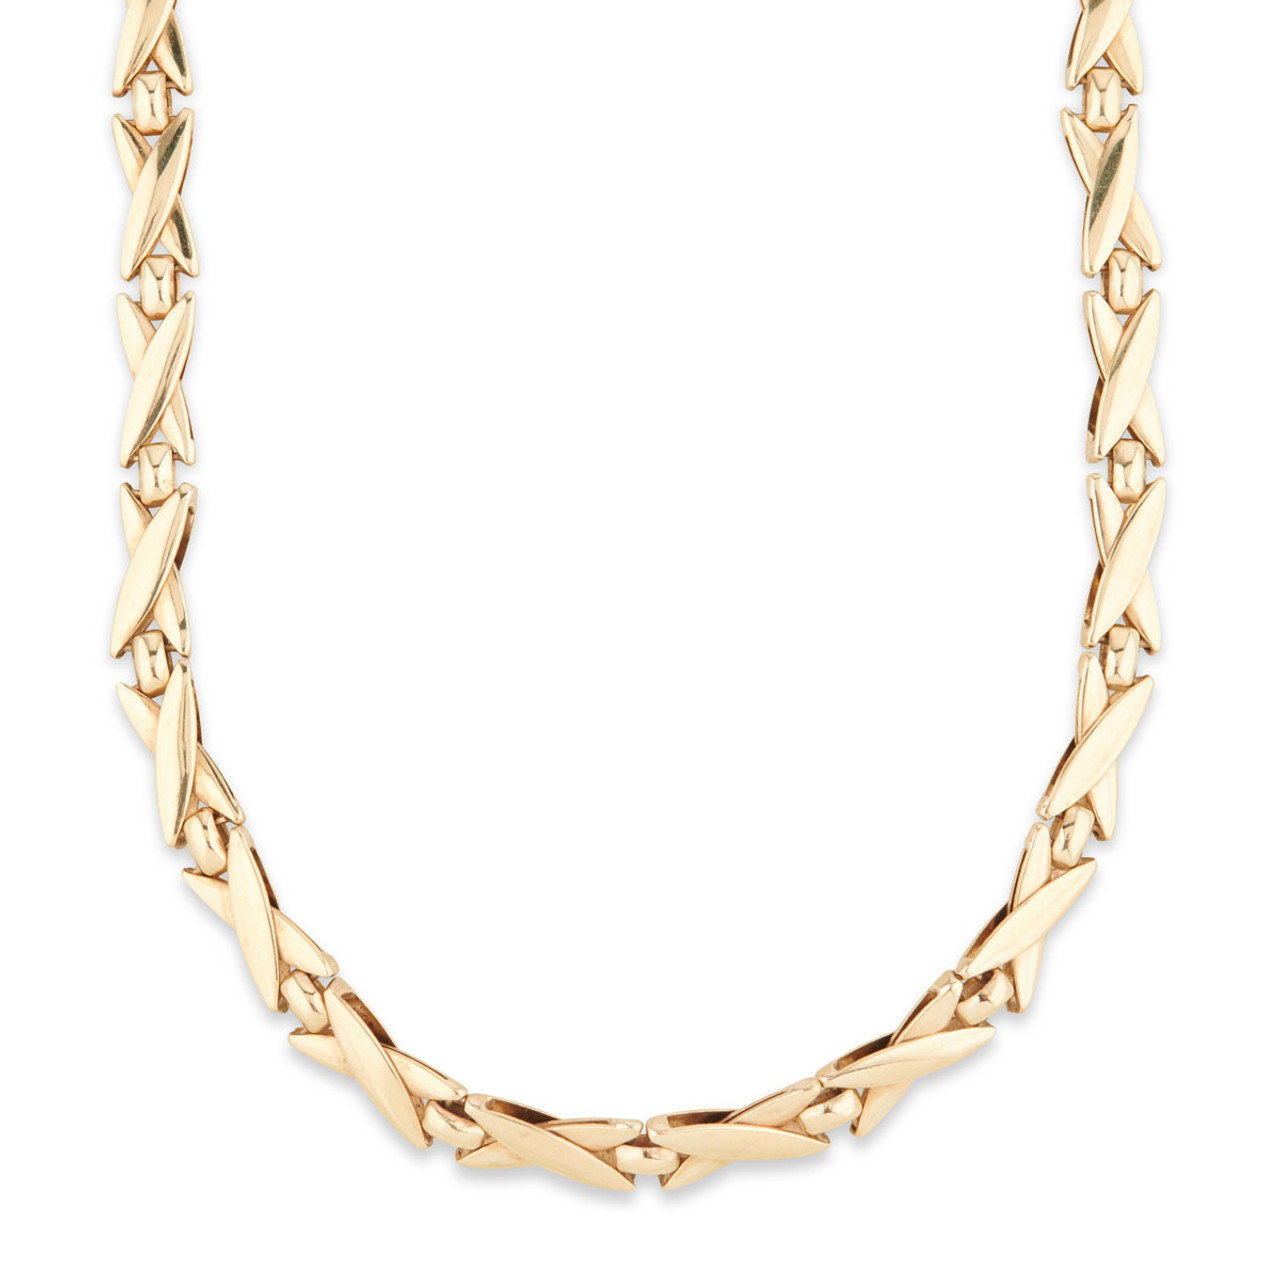 9CT GOLD MESH NECKLACE